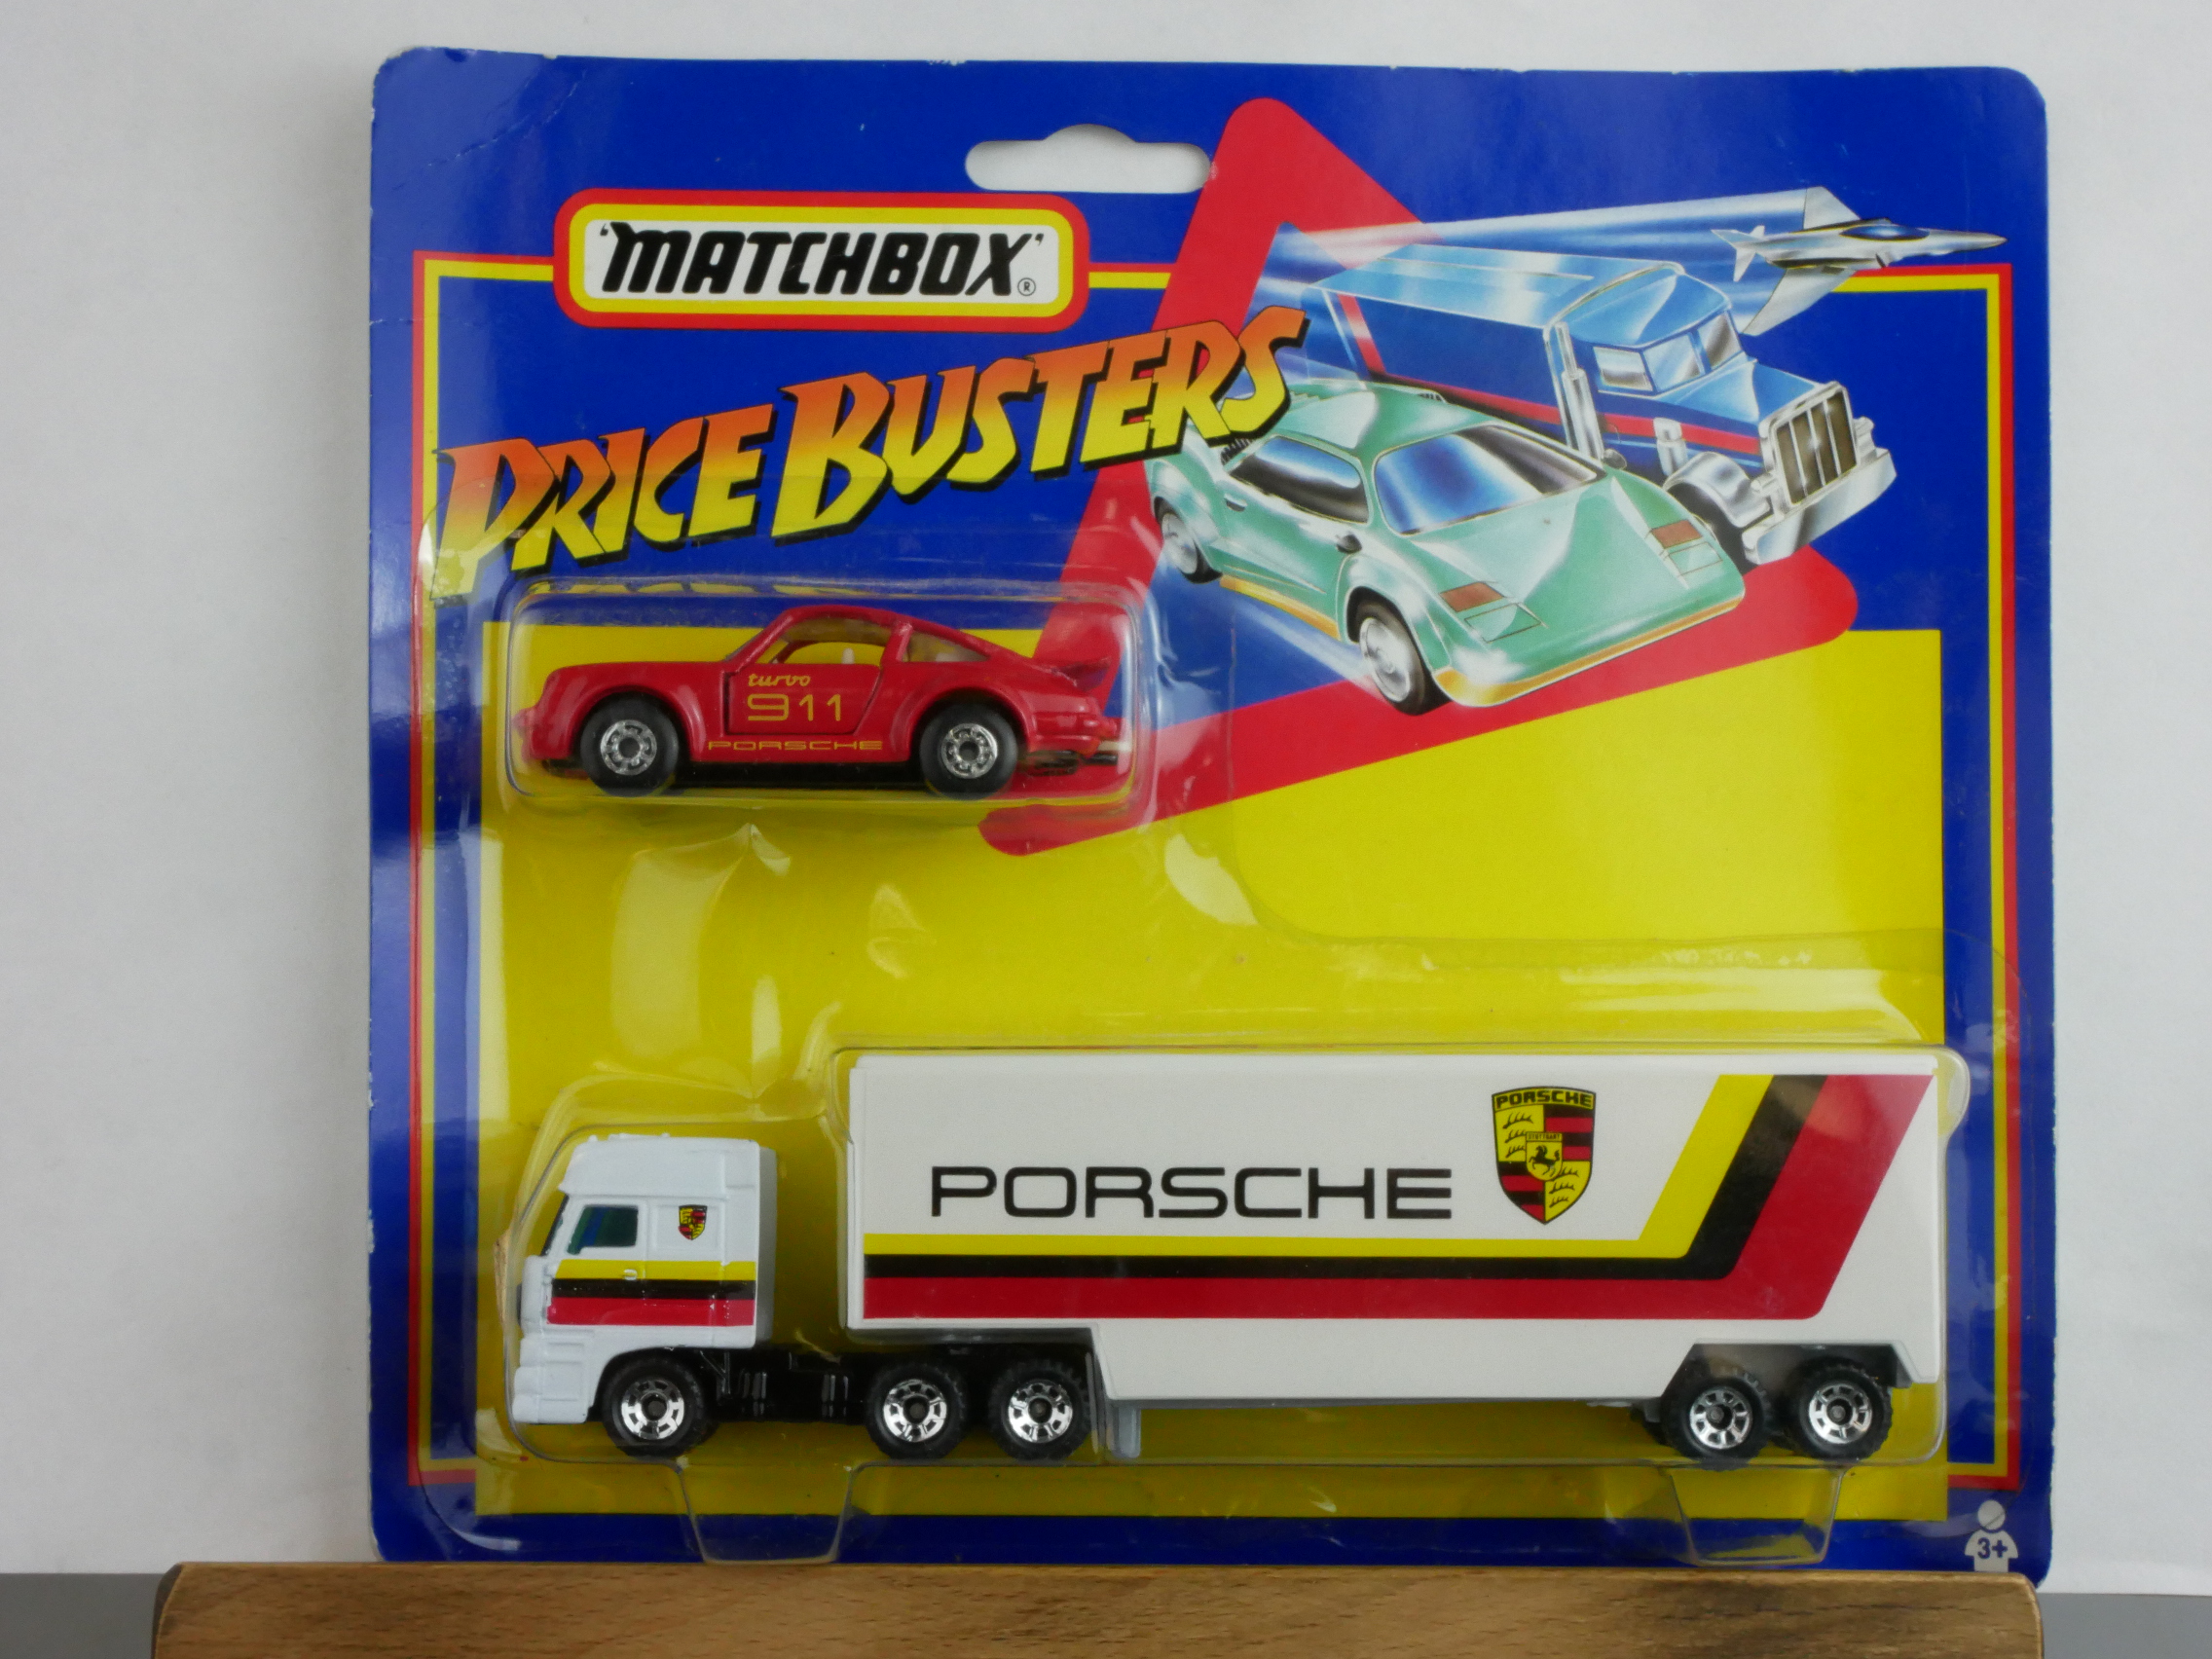 2-Pack Price Busters Porsche - 60036